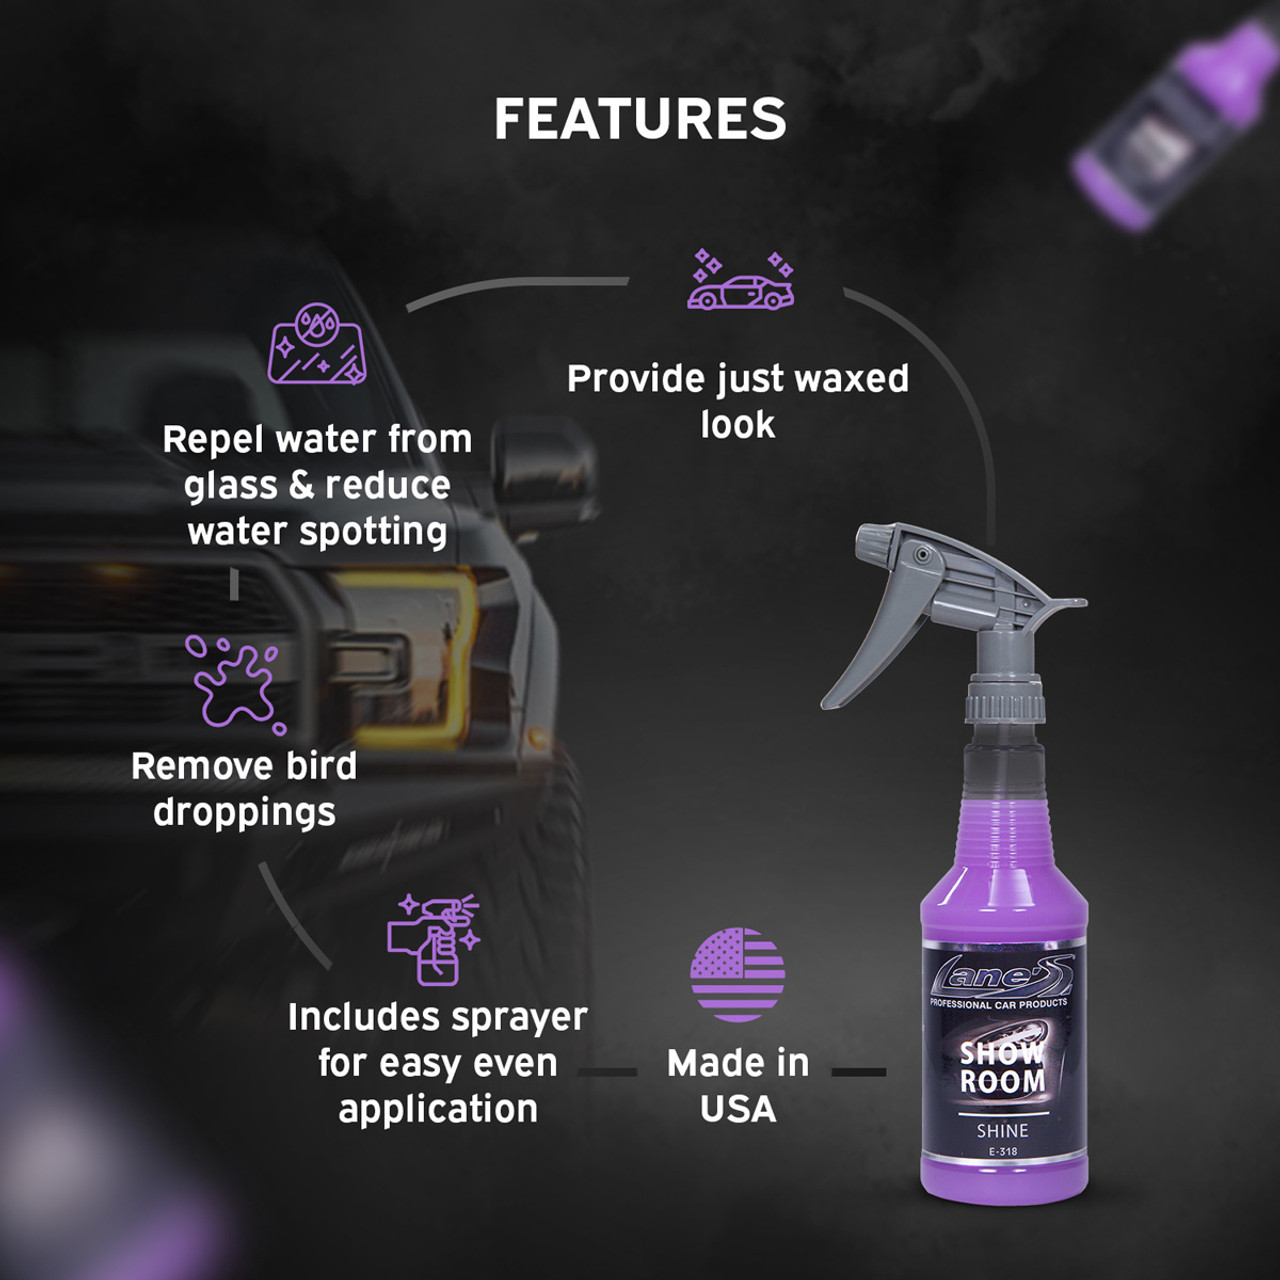 Car Show Prep 1 Gal: Quick detailing spray, get your car shining between  washes – Patterson Car Care